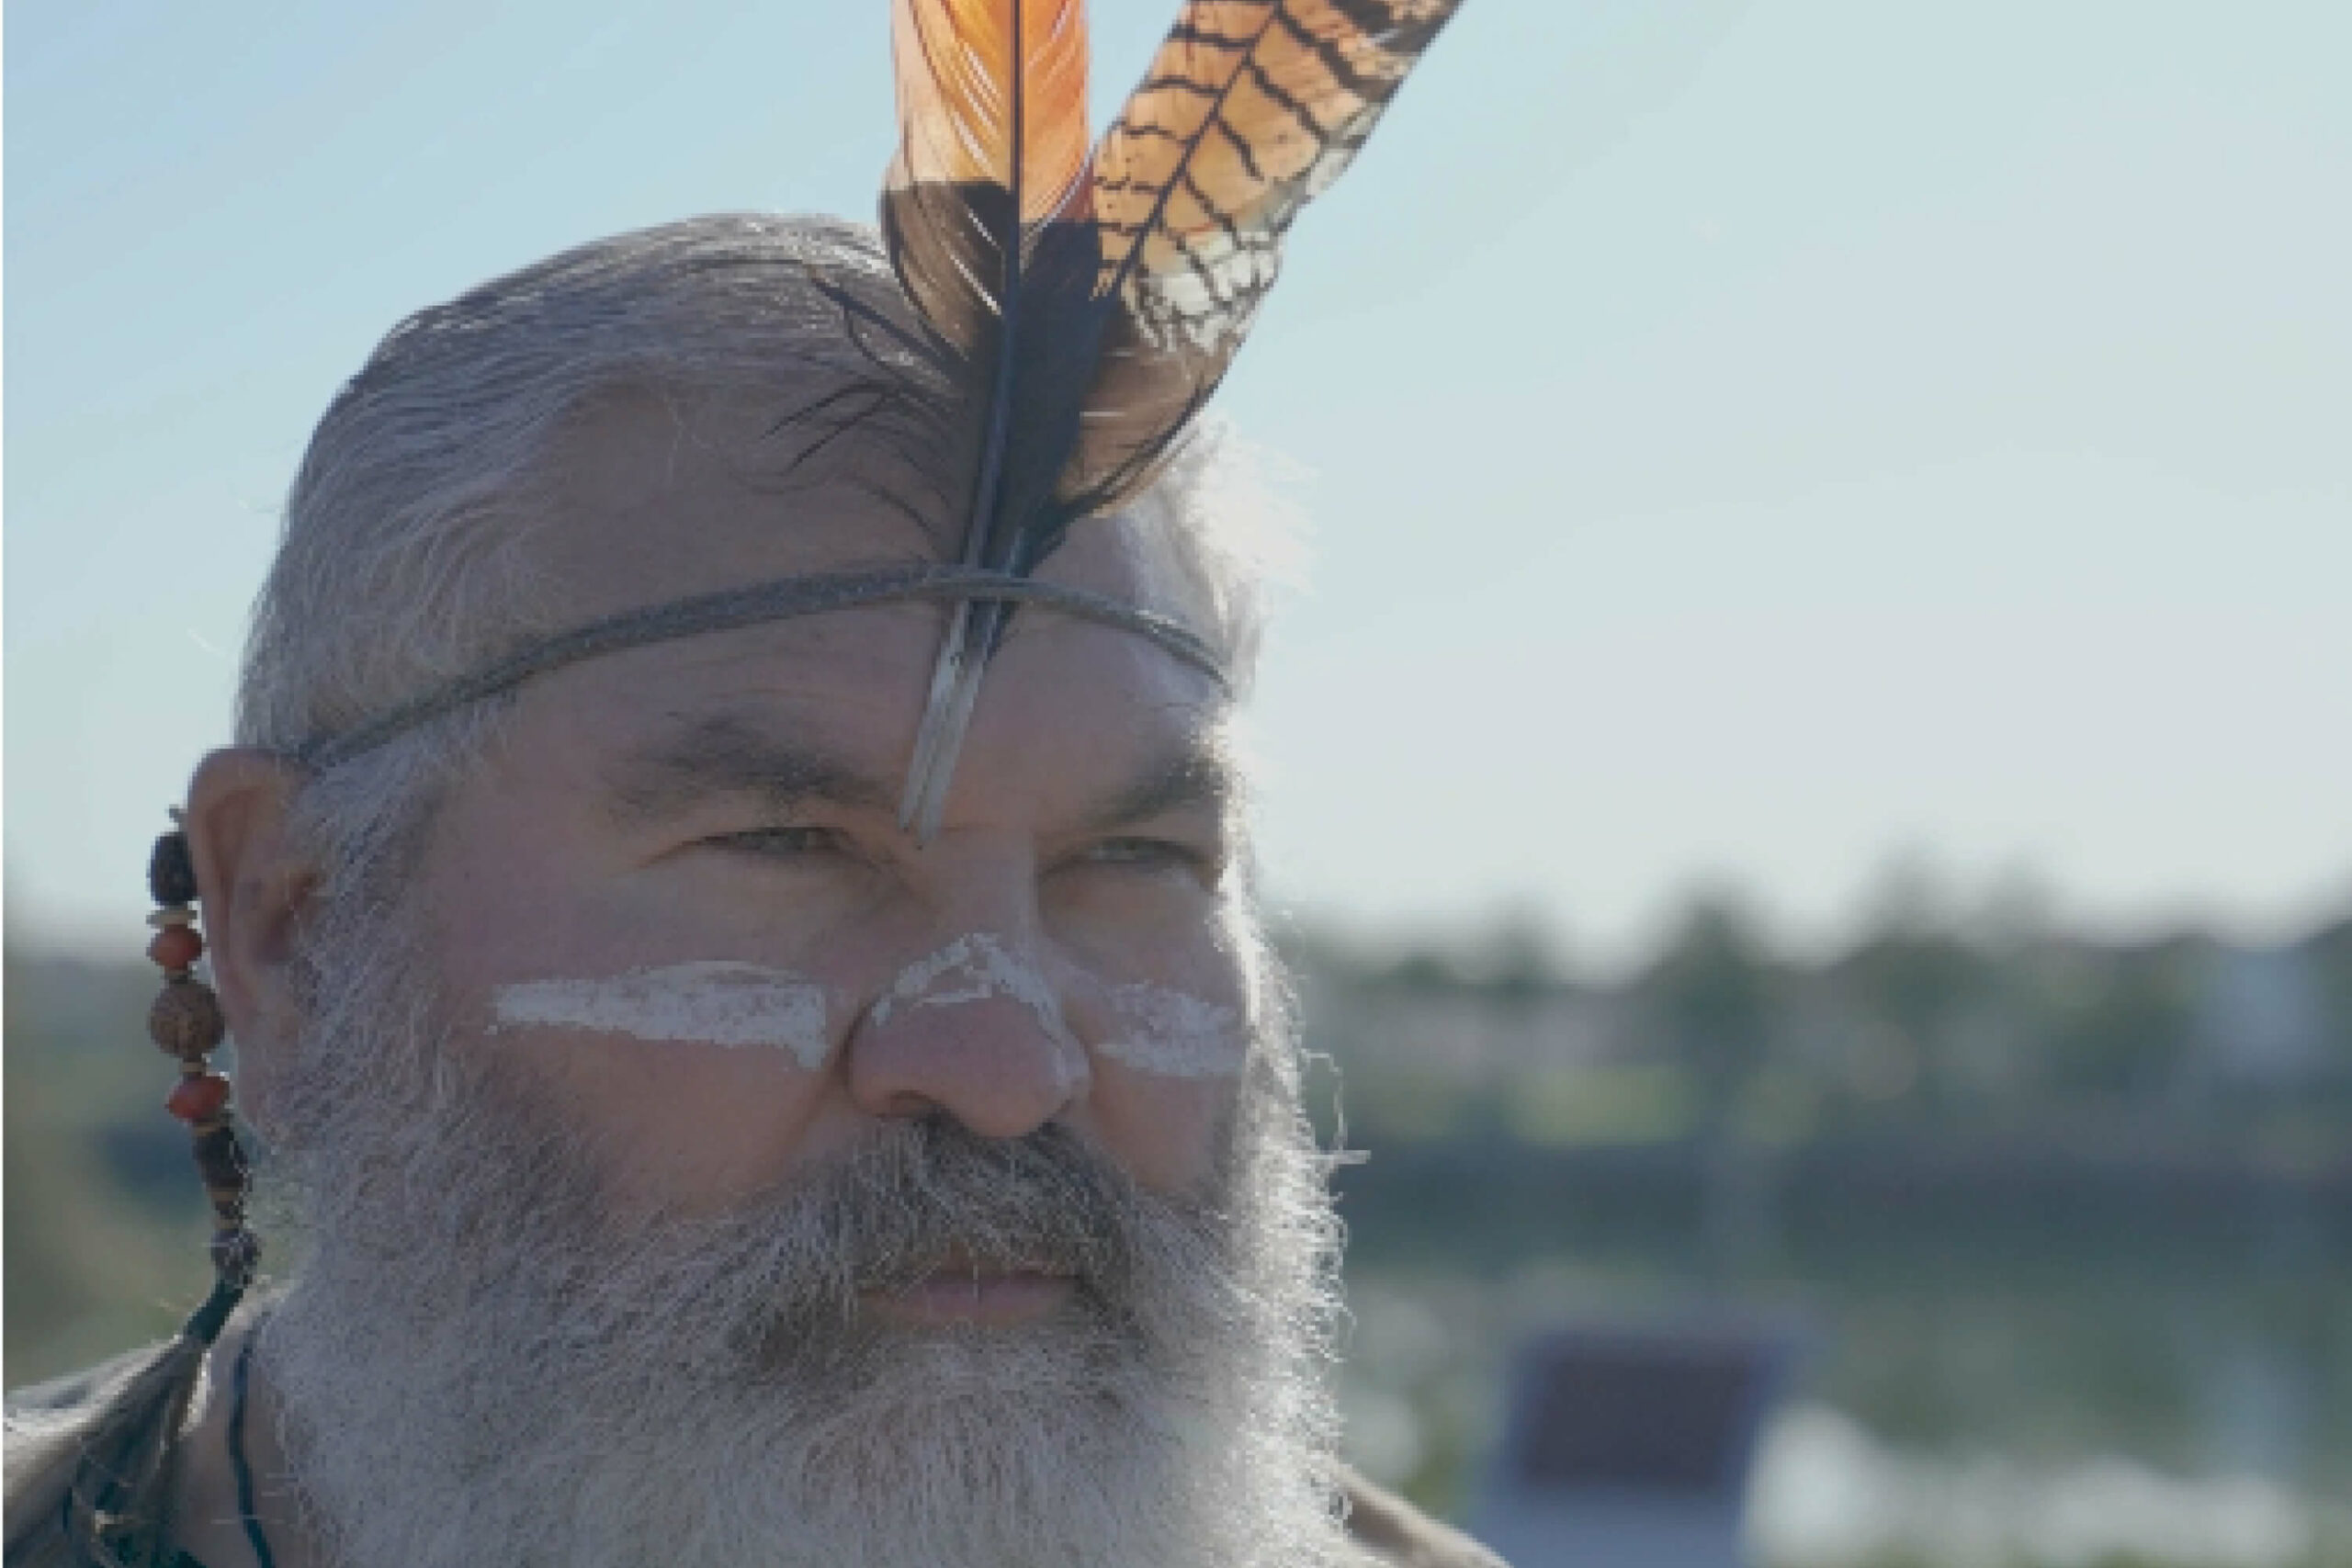 Man in traditional dress with grey beard and feathered headdress, looking into distance.